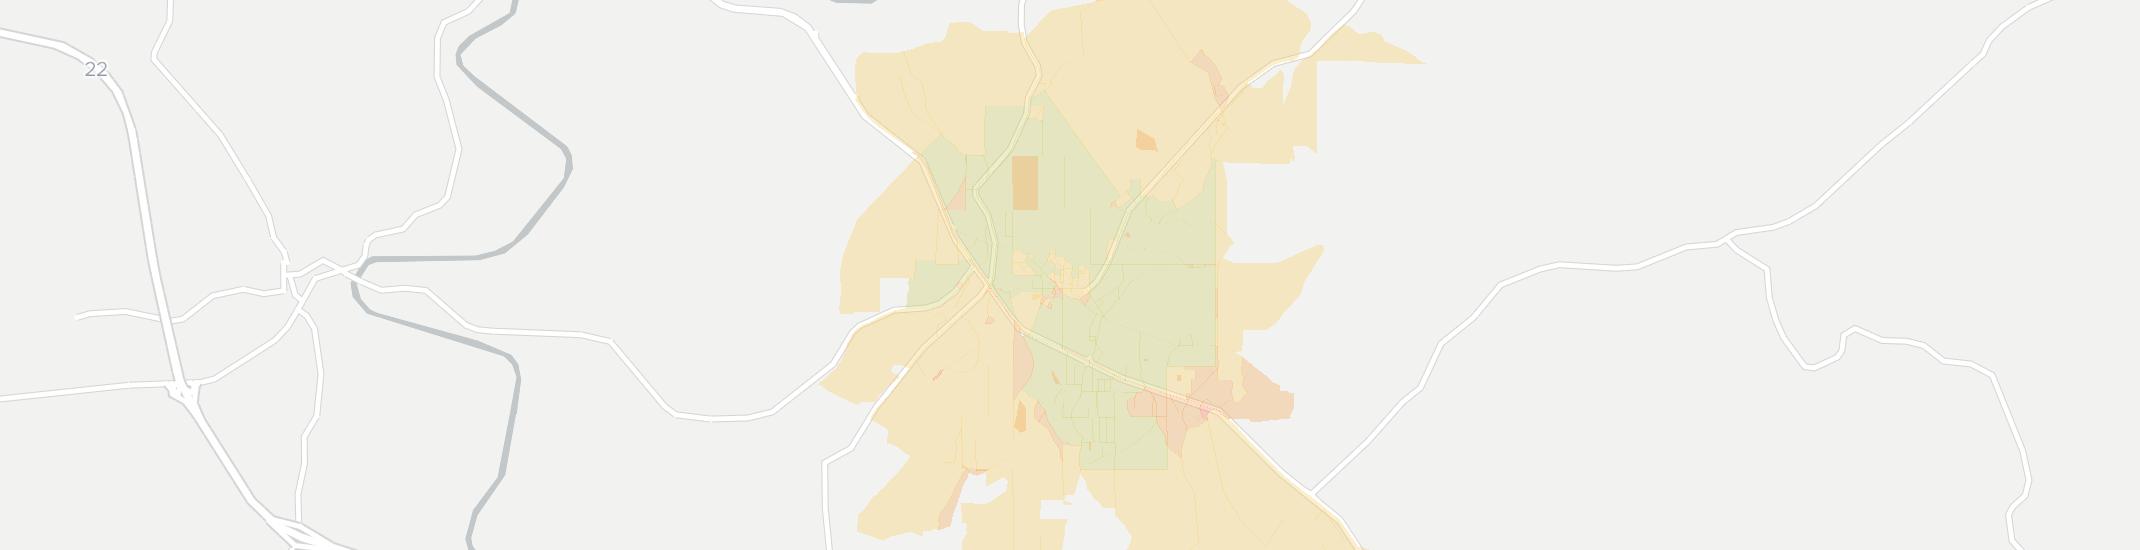 Sumiton Internet Competition Map. Click for interactive map.